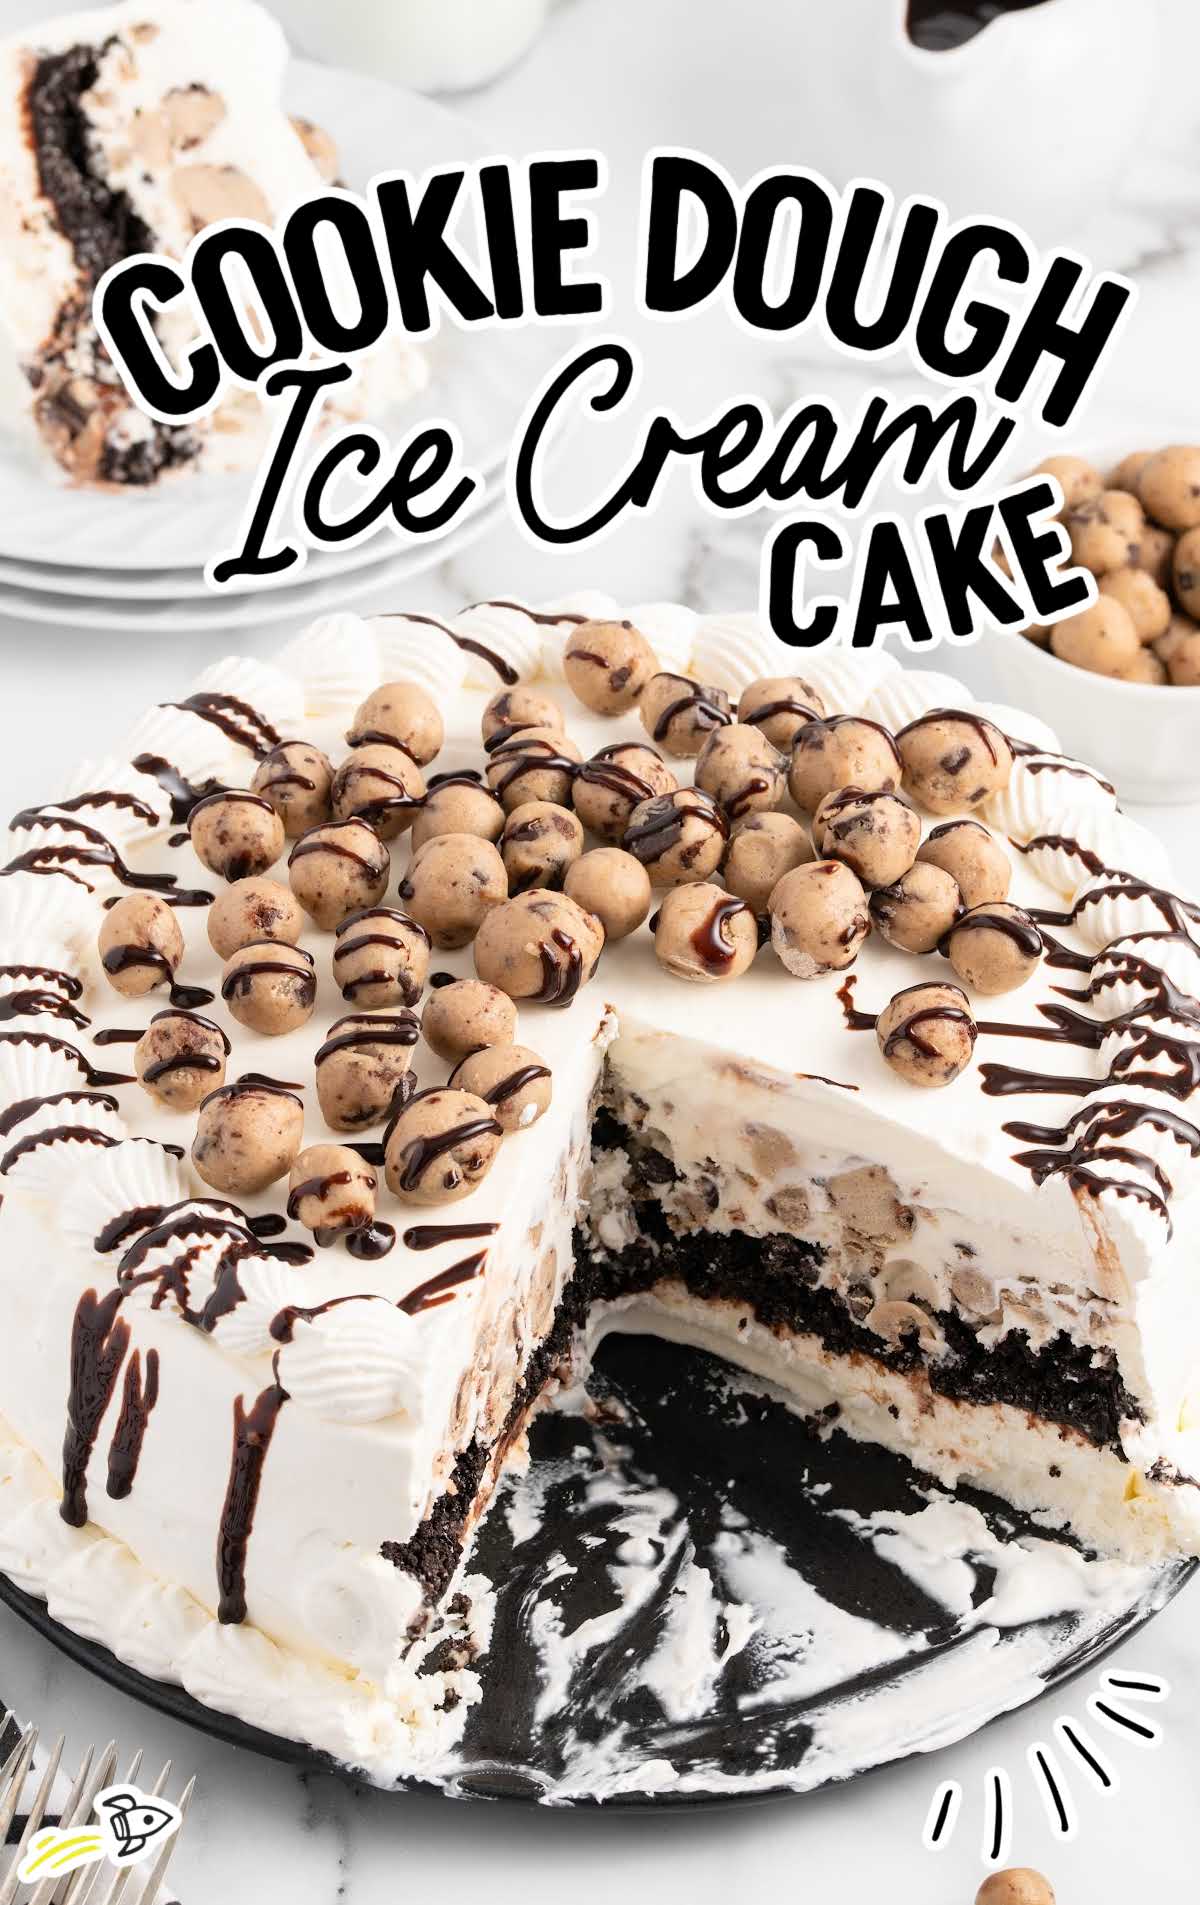 a close-up shot of Cookie Dough Ice Cream Cake with a slice taken out